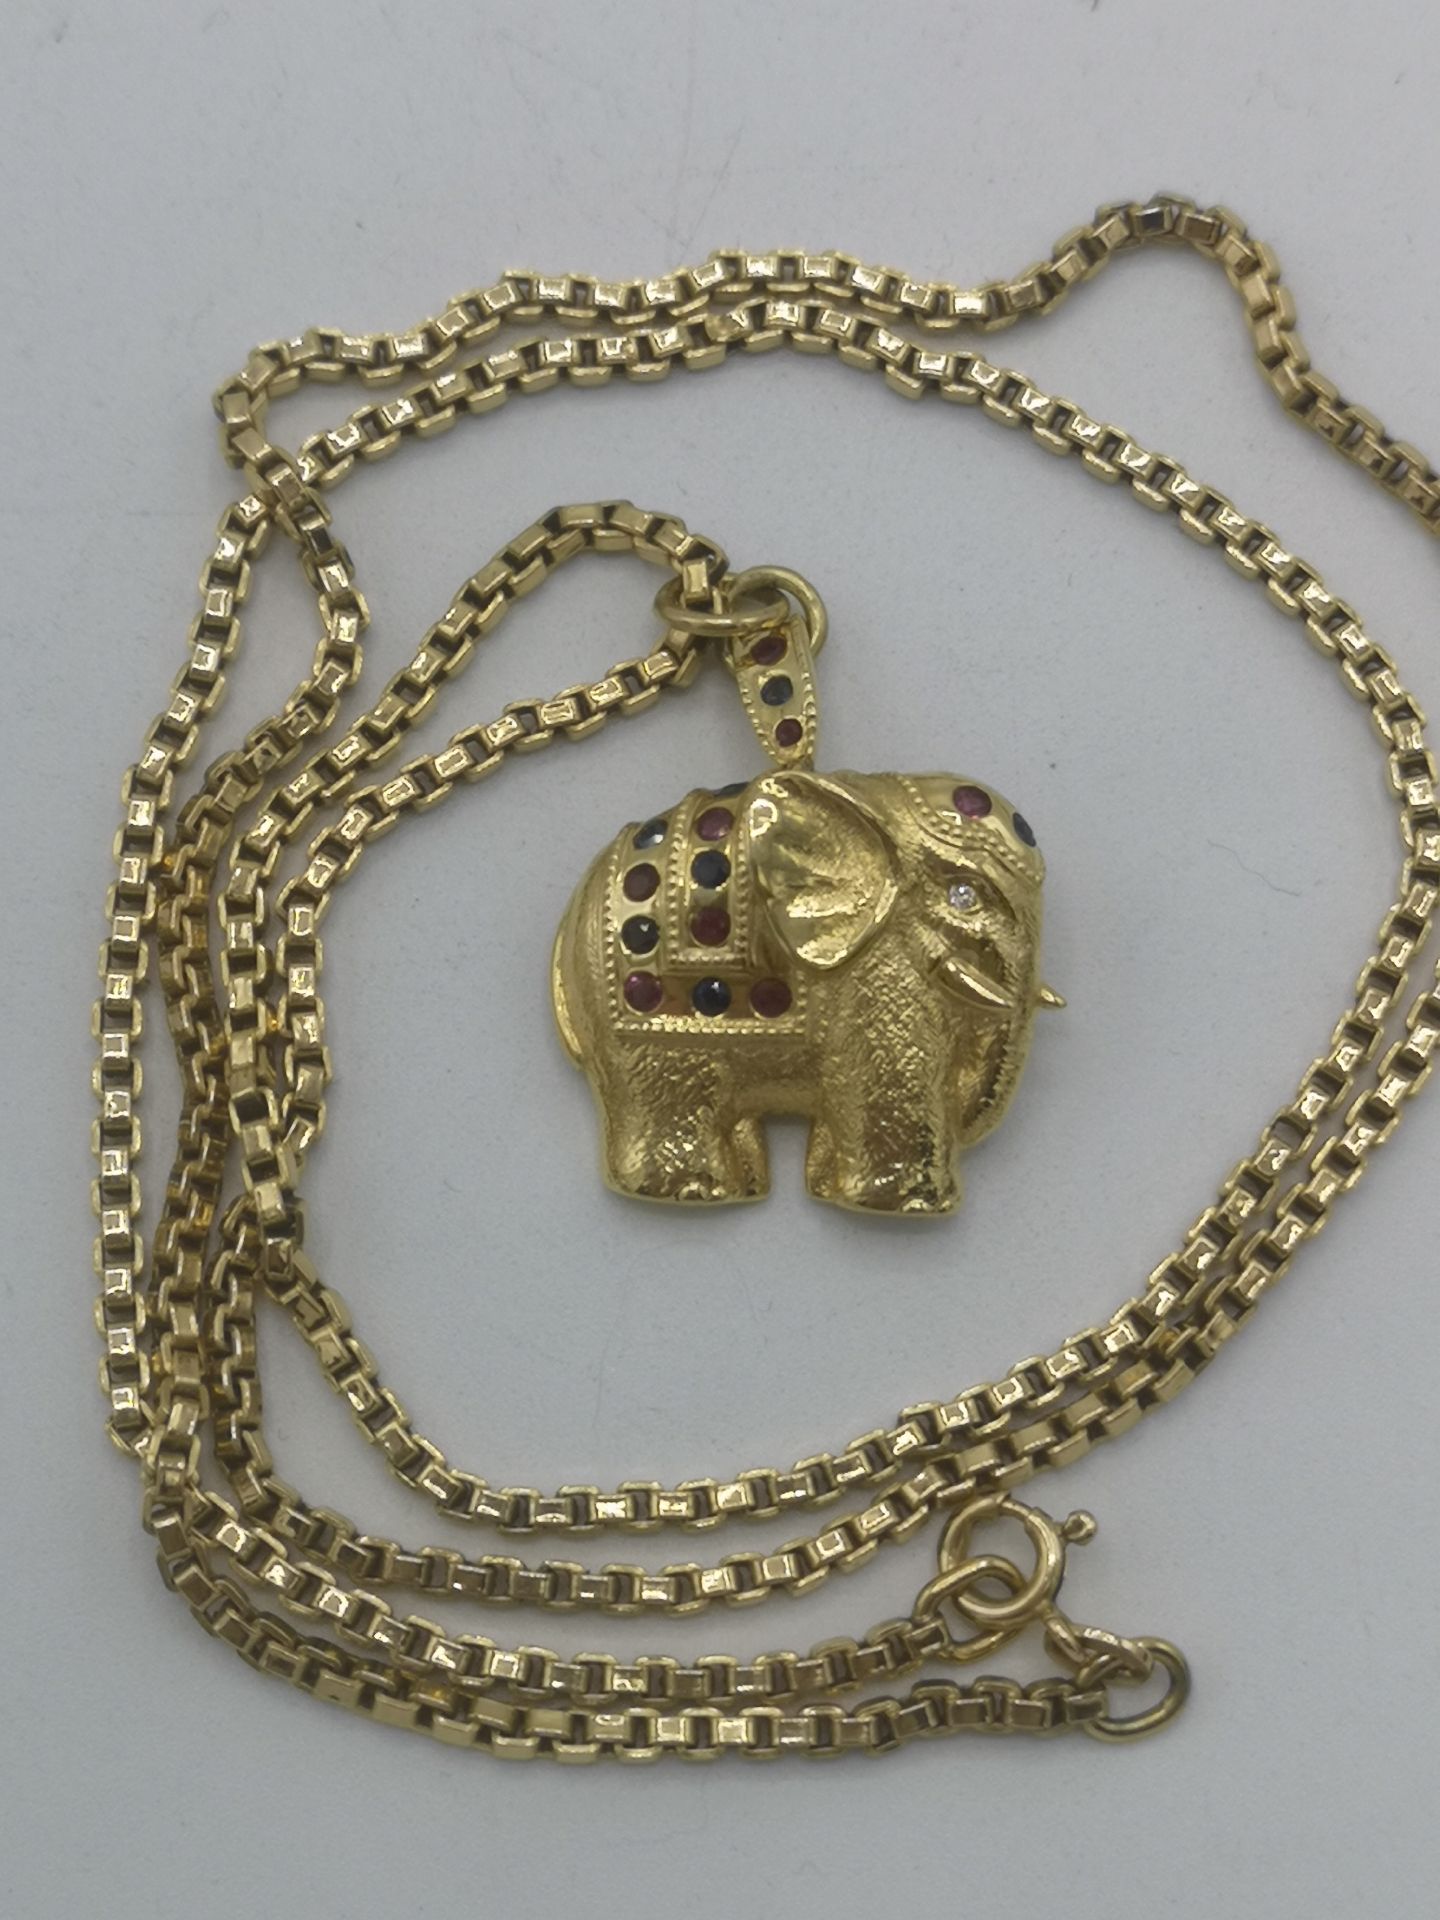 18ct gold elephant pendant set with gemstones on 18ct gold chain - Image 8 of 11